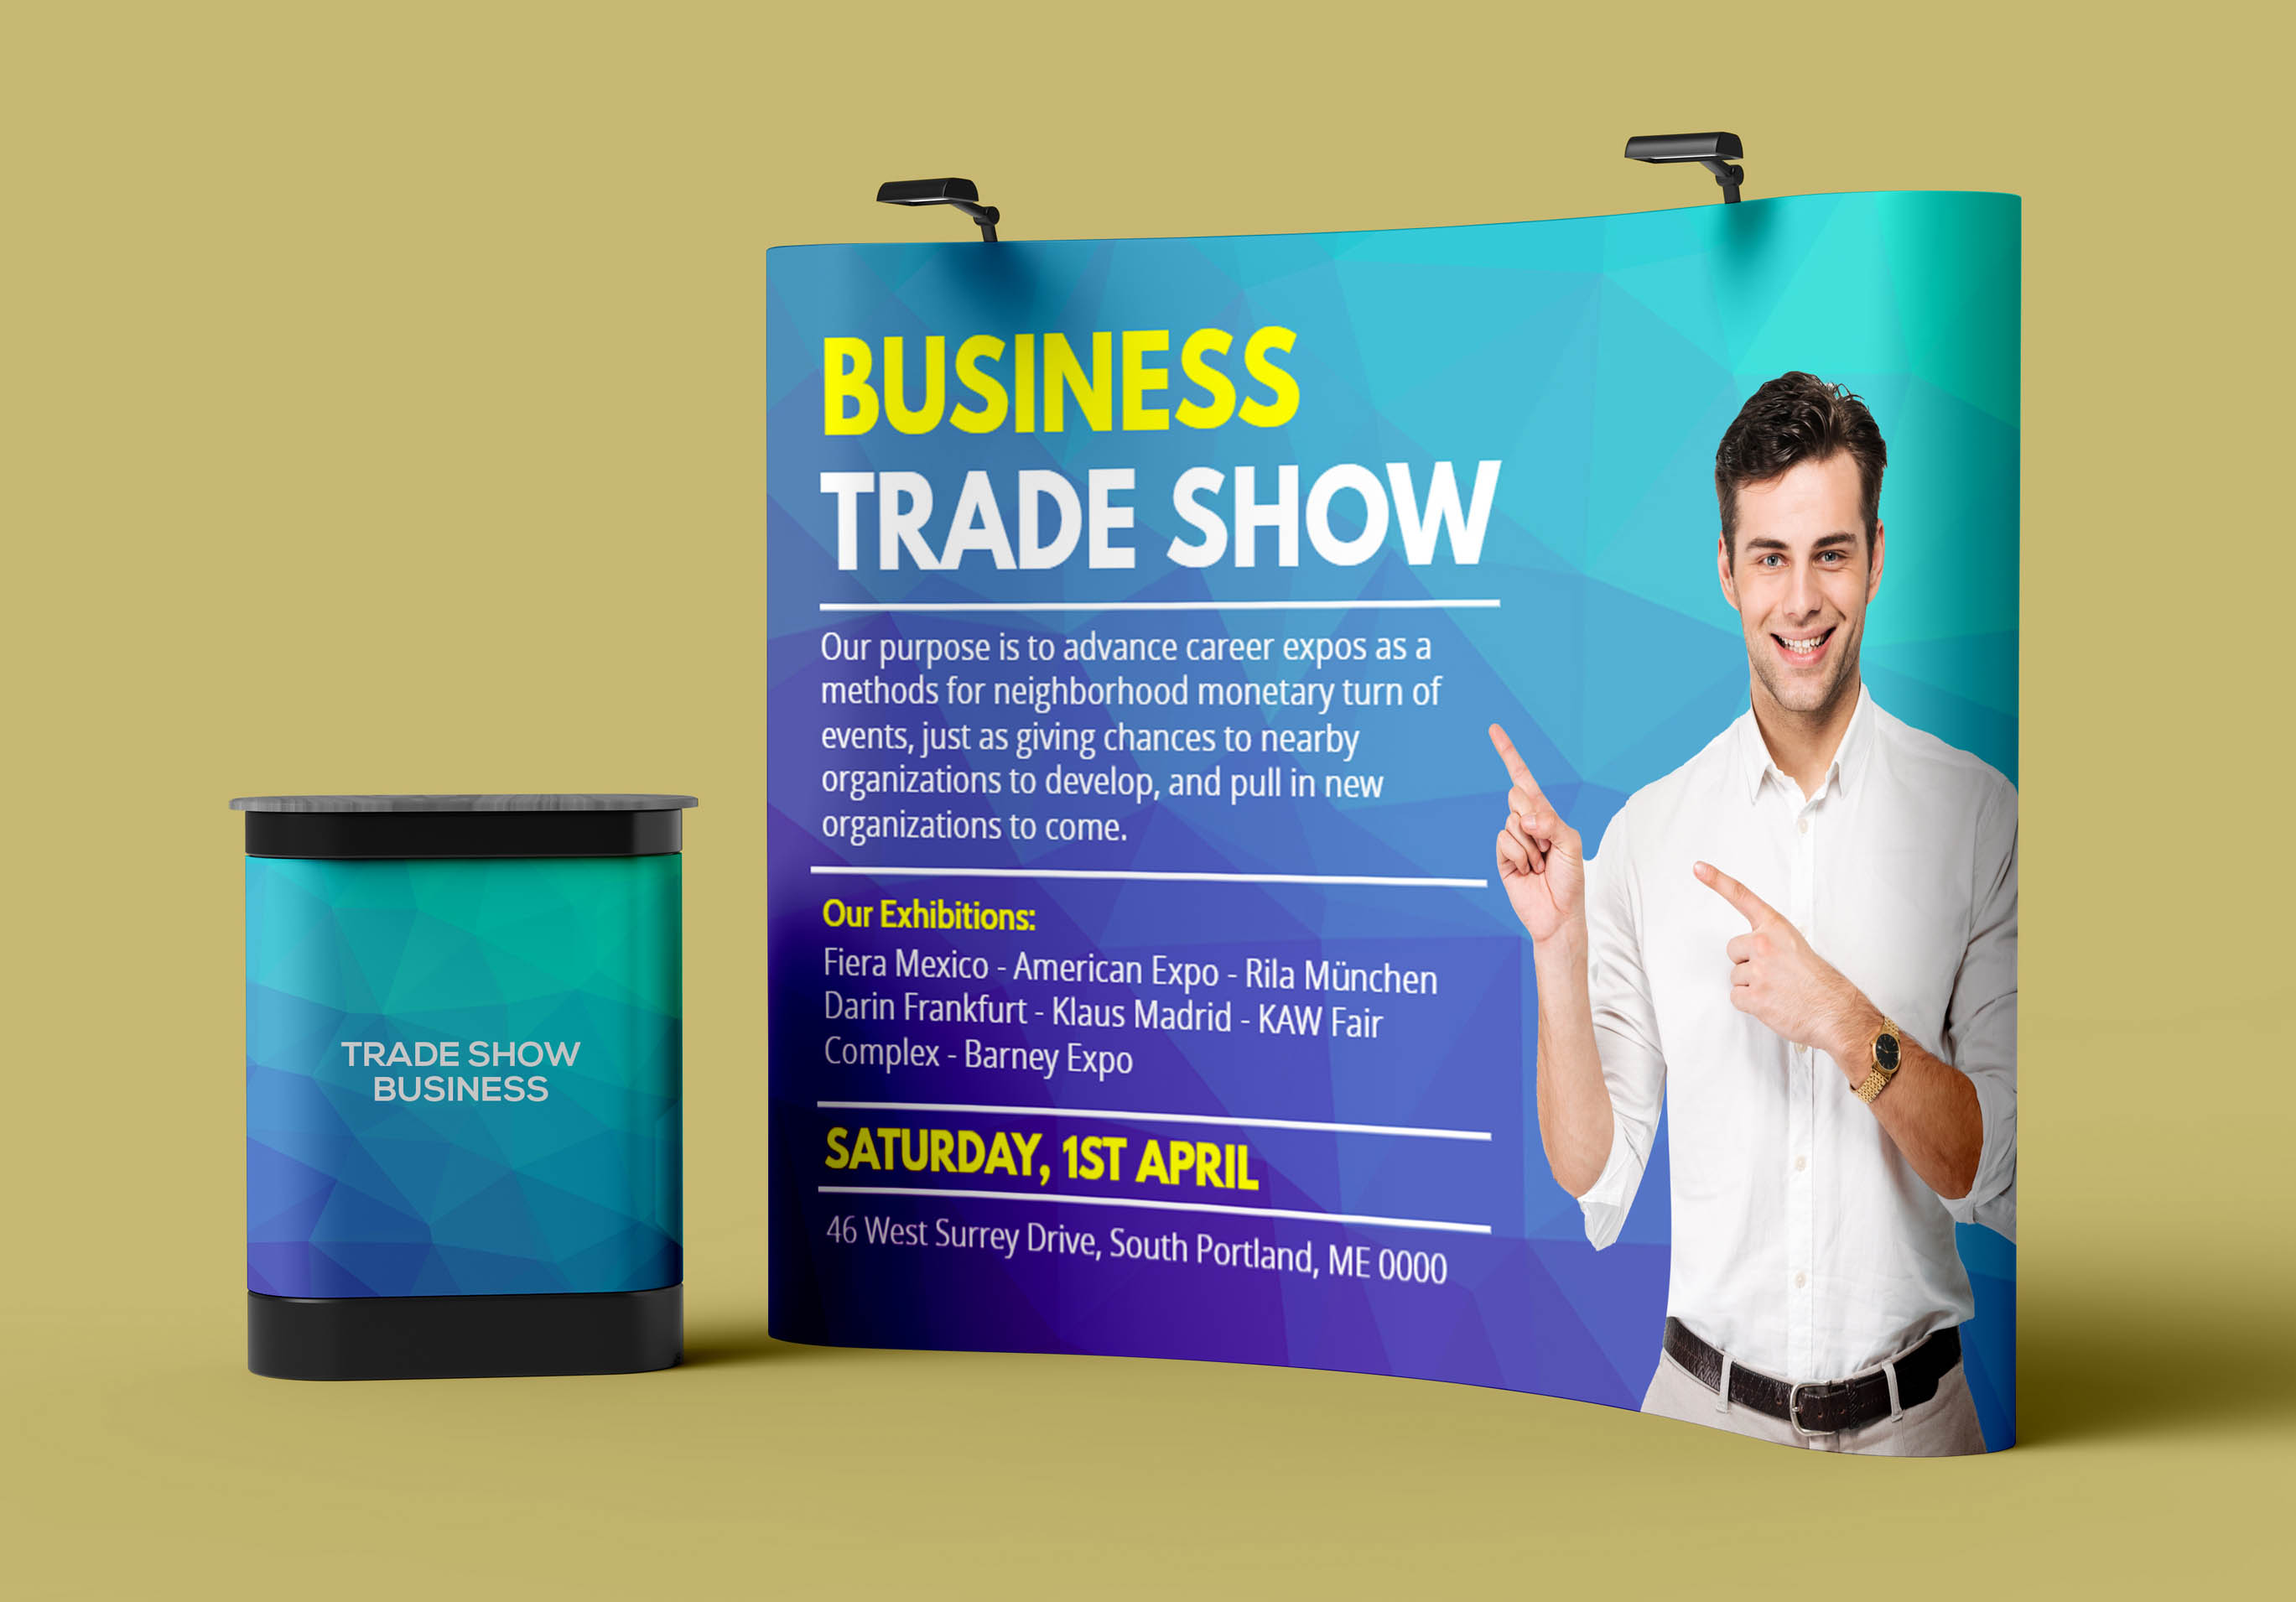 I will design eye catching exhibition backdrop, rollup banner, trade show booth and signage design